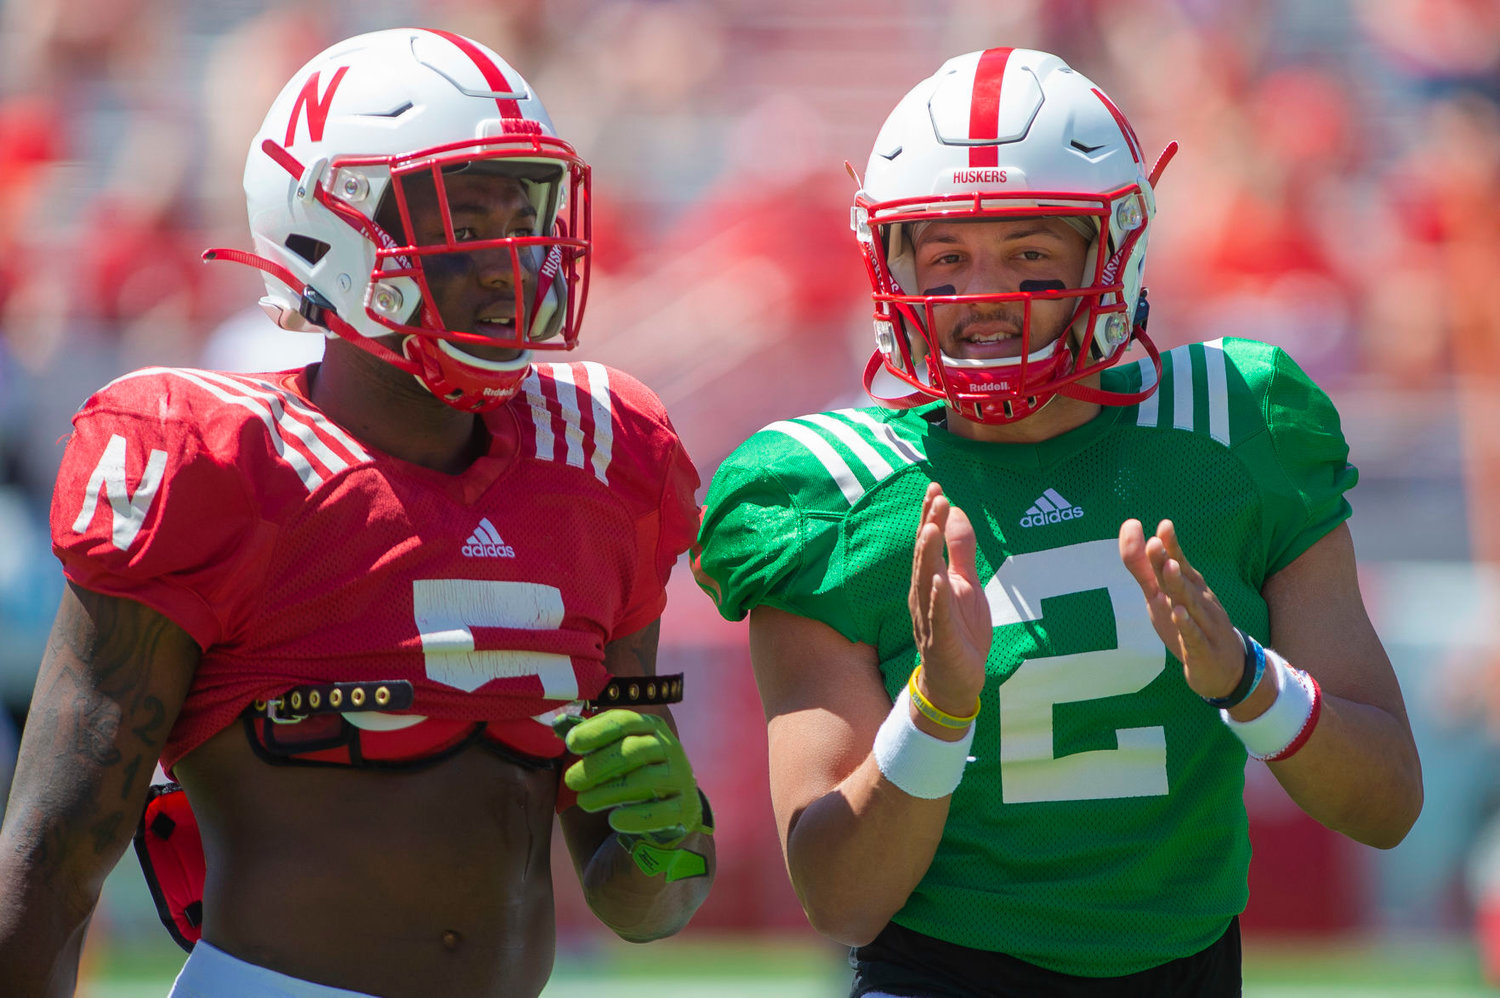 We learned quite a bit about the Husker offense this spring, so how